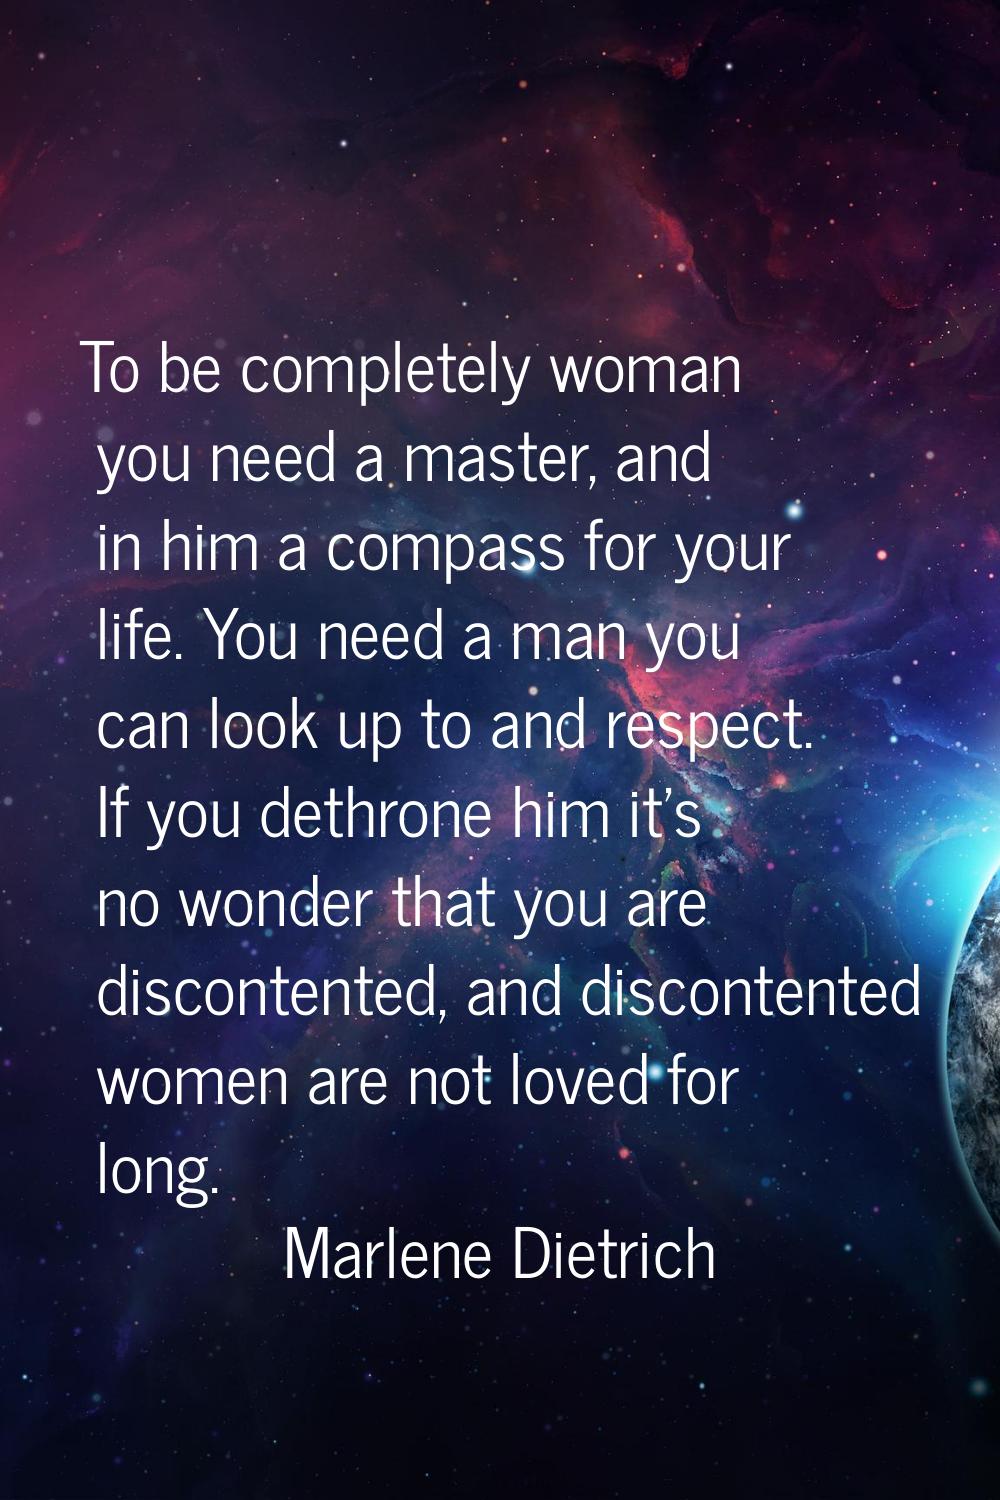 To be completely woman you need a master, and in him a compass for your life. You need a man you ca